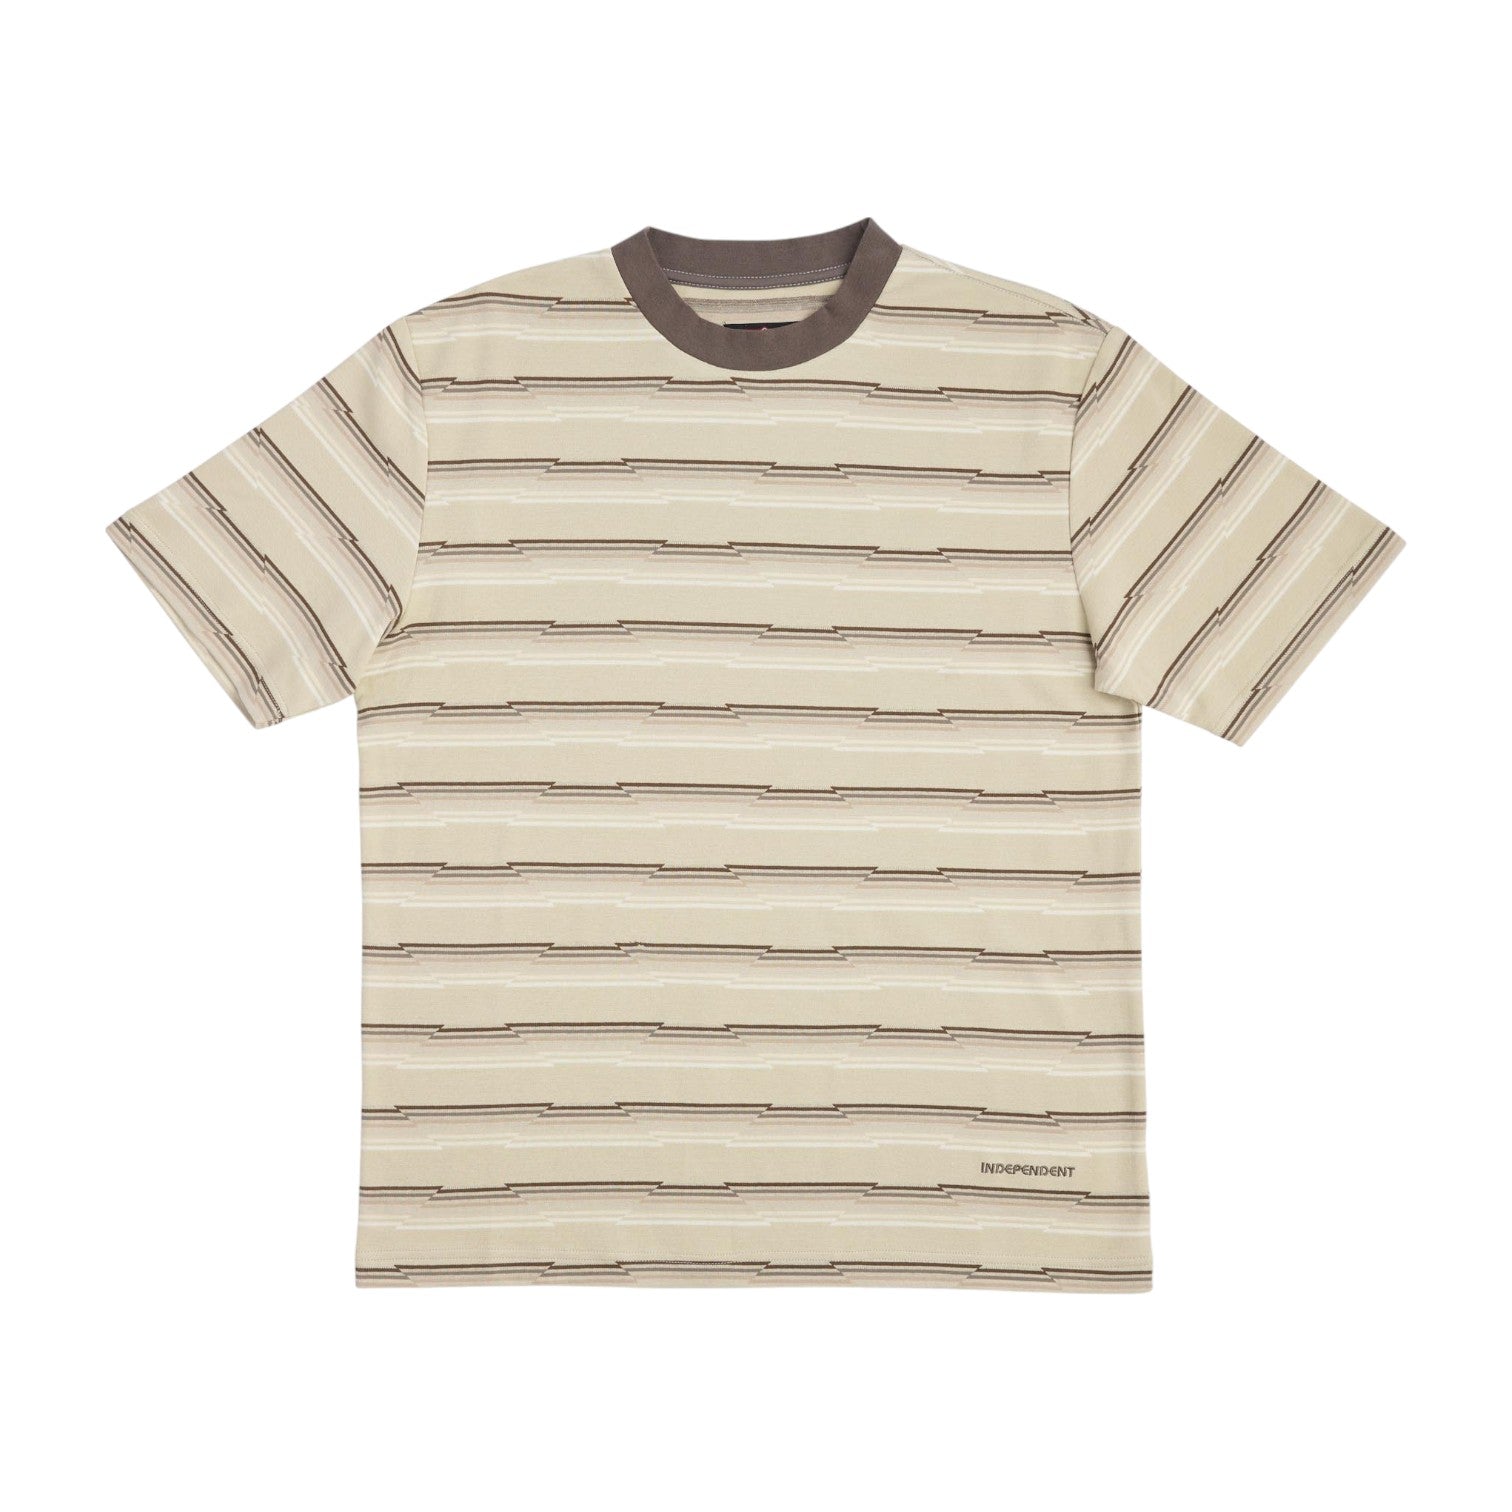 Independent Wired S/S Ringer T-Shirt - Sand Stripe